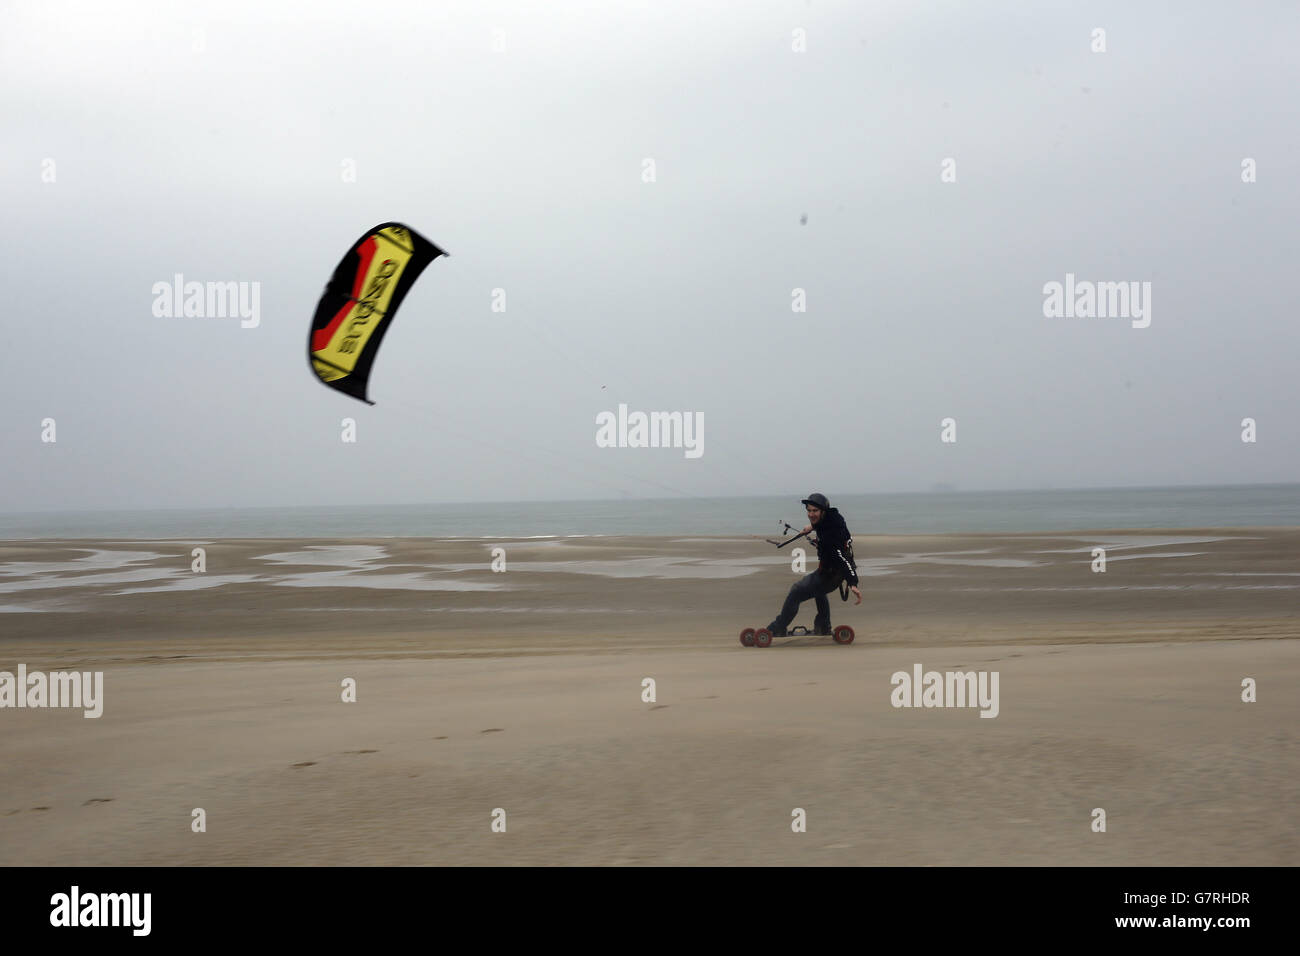 Kite boarder Steve Smith who reached 36.1mph on a beach in Hayling Island, Hampshire, which subject to verification from Datron technology and then from Guinness World Records is a brand new world record for the fastest speed on a kite board. Stock Photo